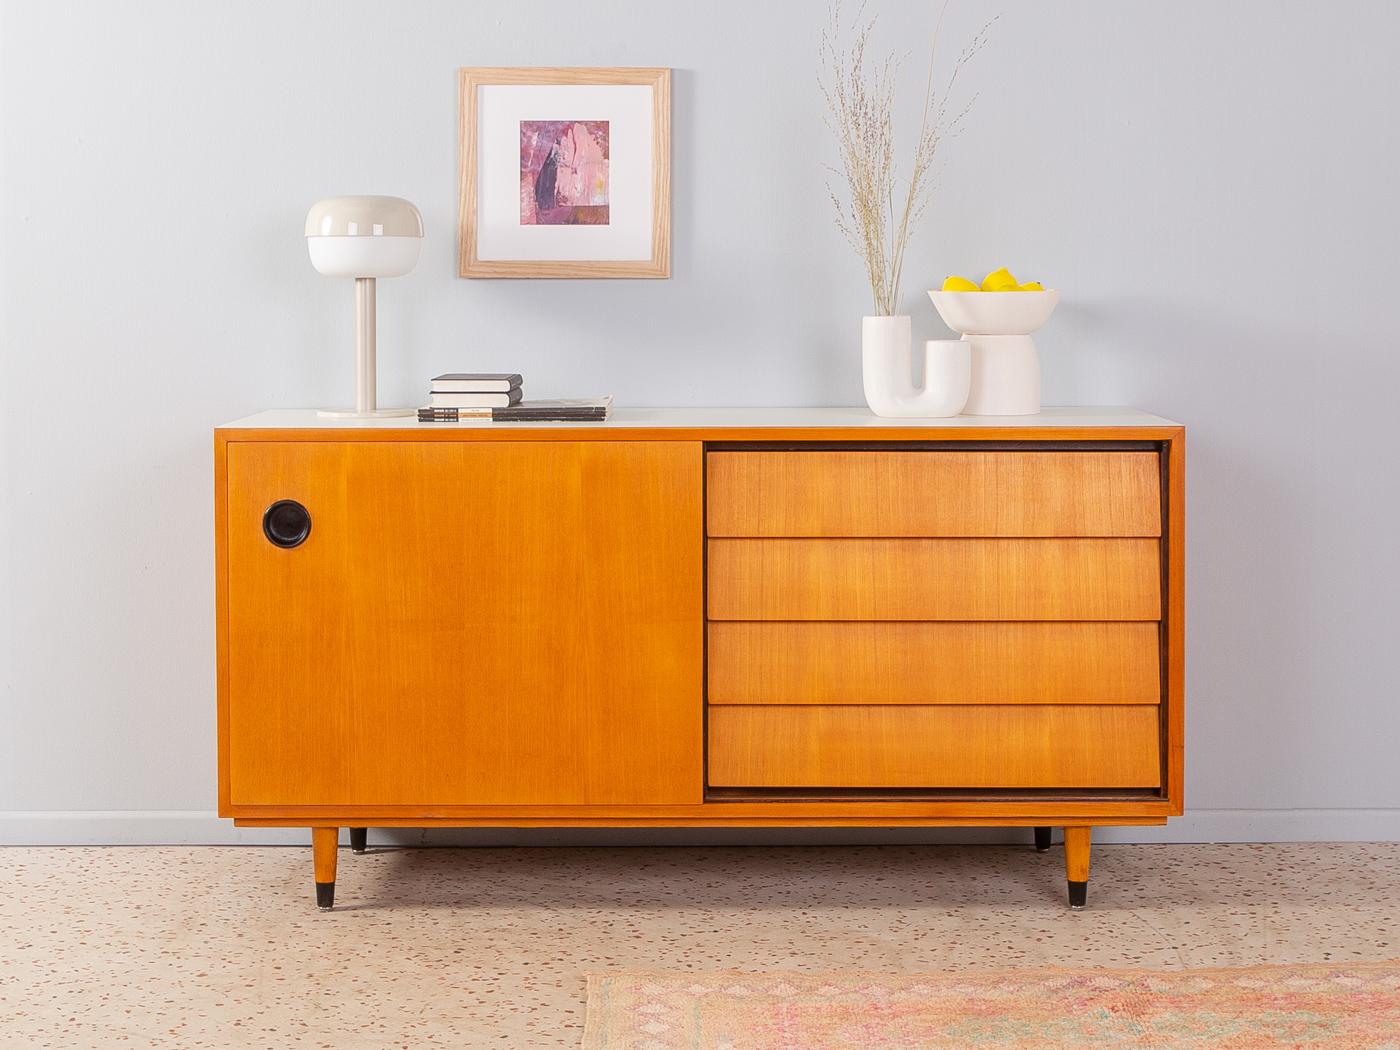 Rare sideboard from the 1950s by Erich Stratmann for the Oldenburger Möbelwerkstätten. Corpus in ash veneer with four drawers, one sliding door, one shelf and cigar shaped feet. The top is coated with creamy white formica.

Quality Features:
